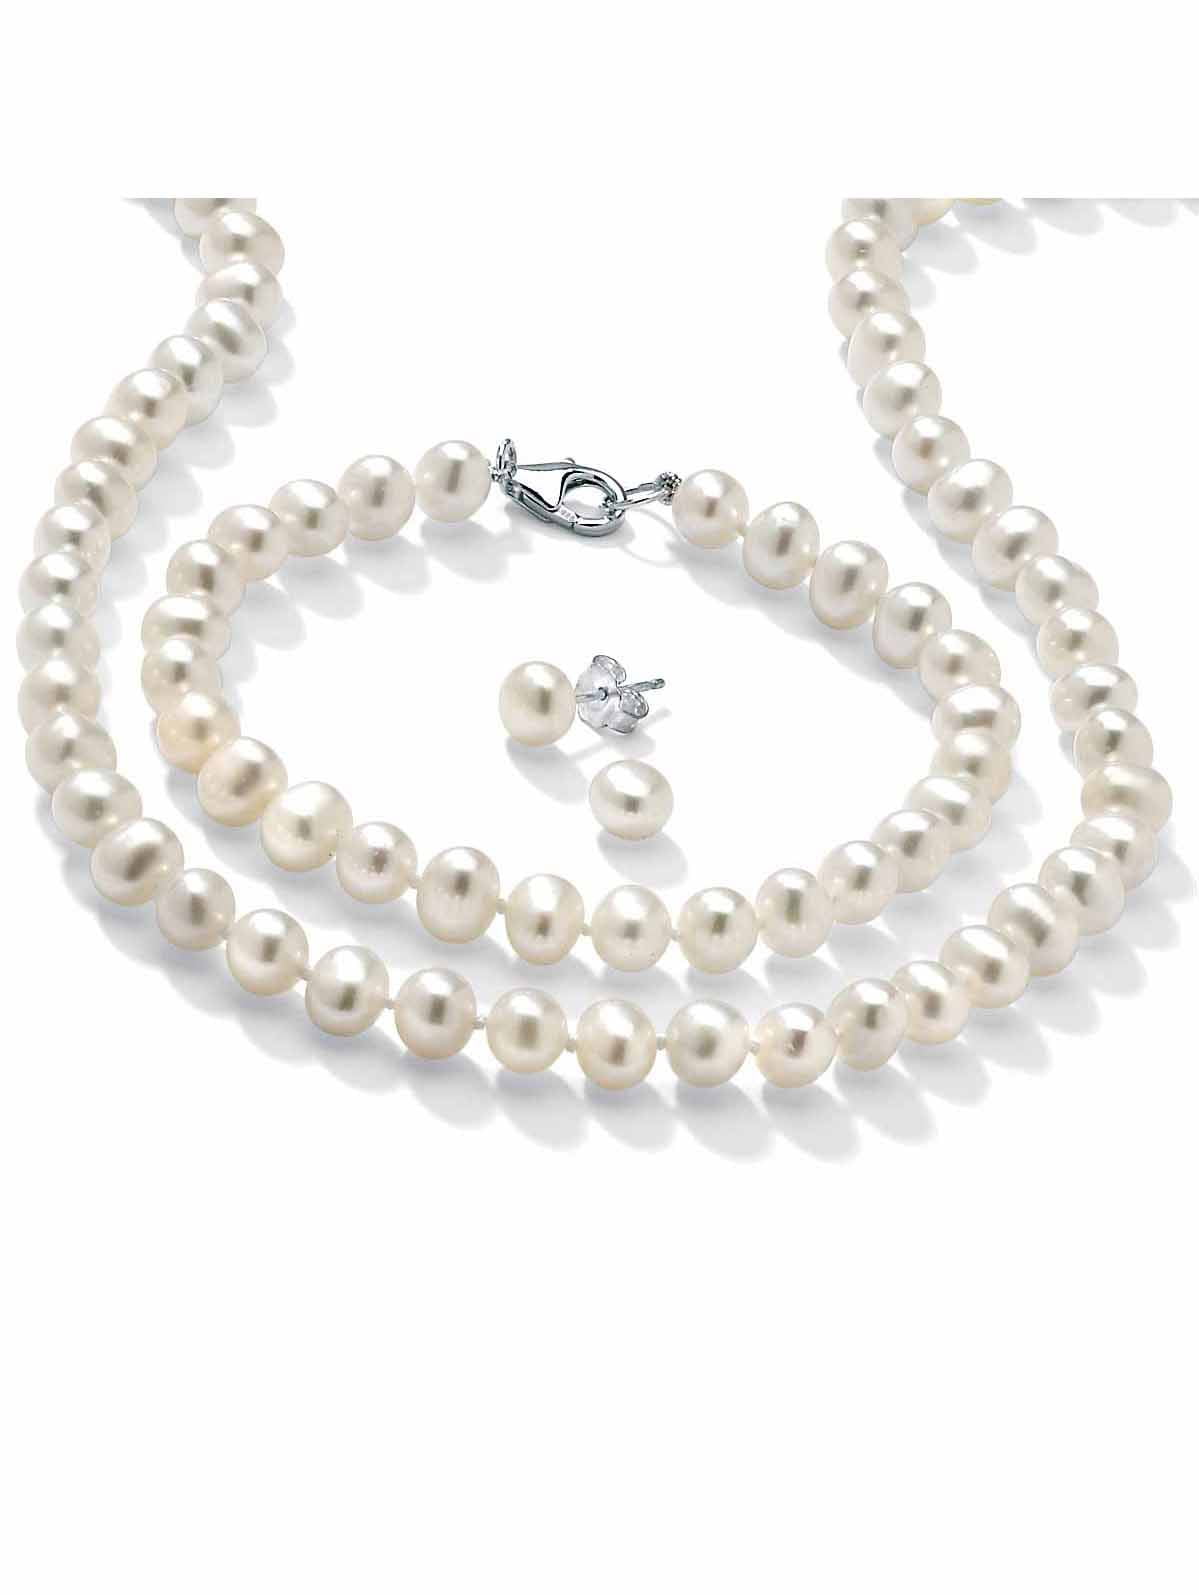 7-8mm Natural White Color Freshwater Pearl Necklace Bracelets Jewelry 1 Set 